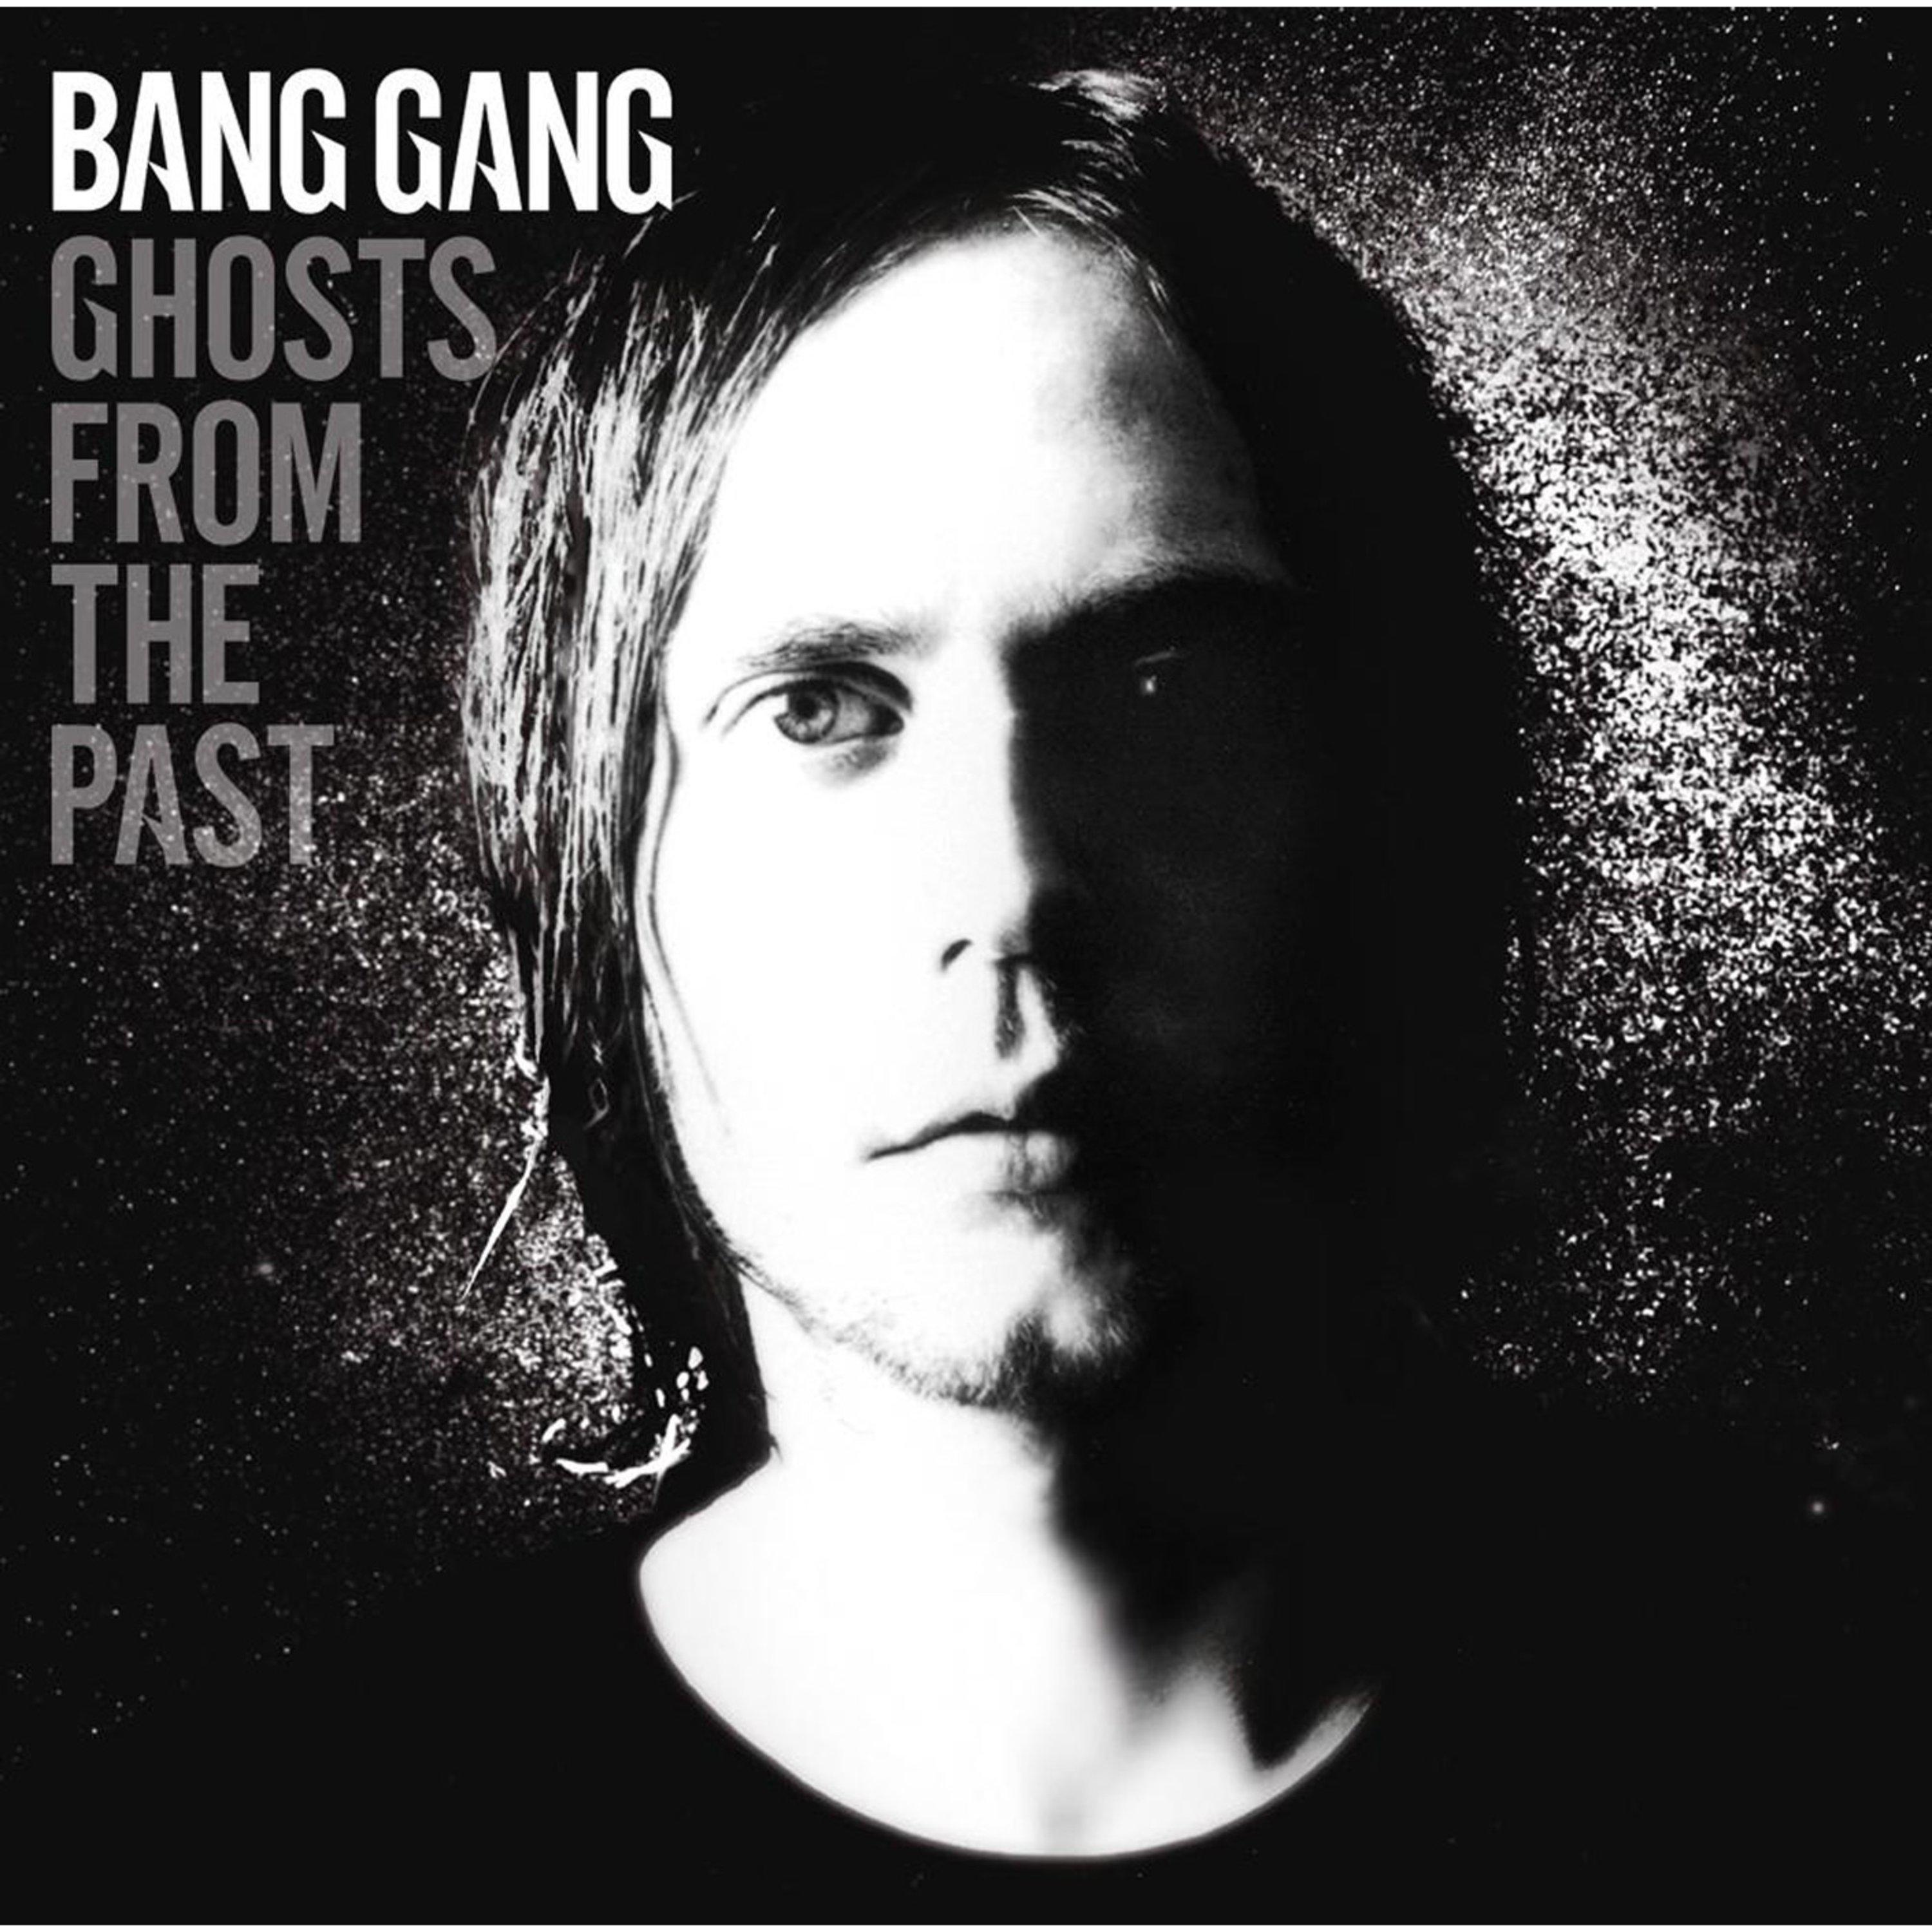 Forever Now歌词 歌手Bang Gang-专辑Ghosts from the Past-单曲《Forever Now》LRC歌词下载